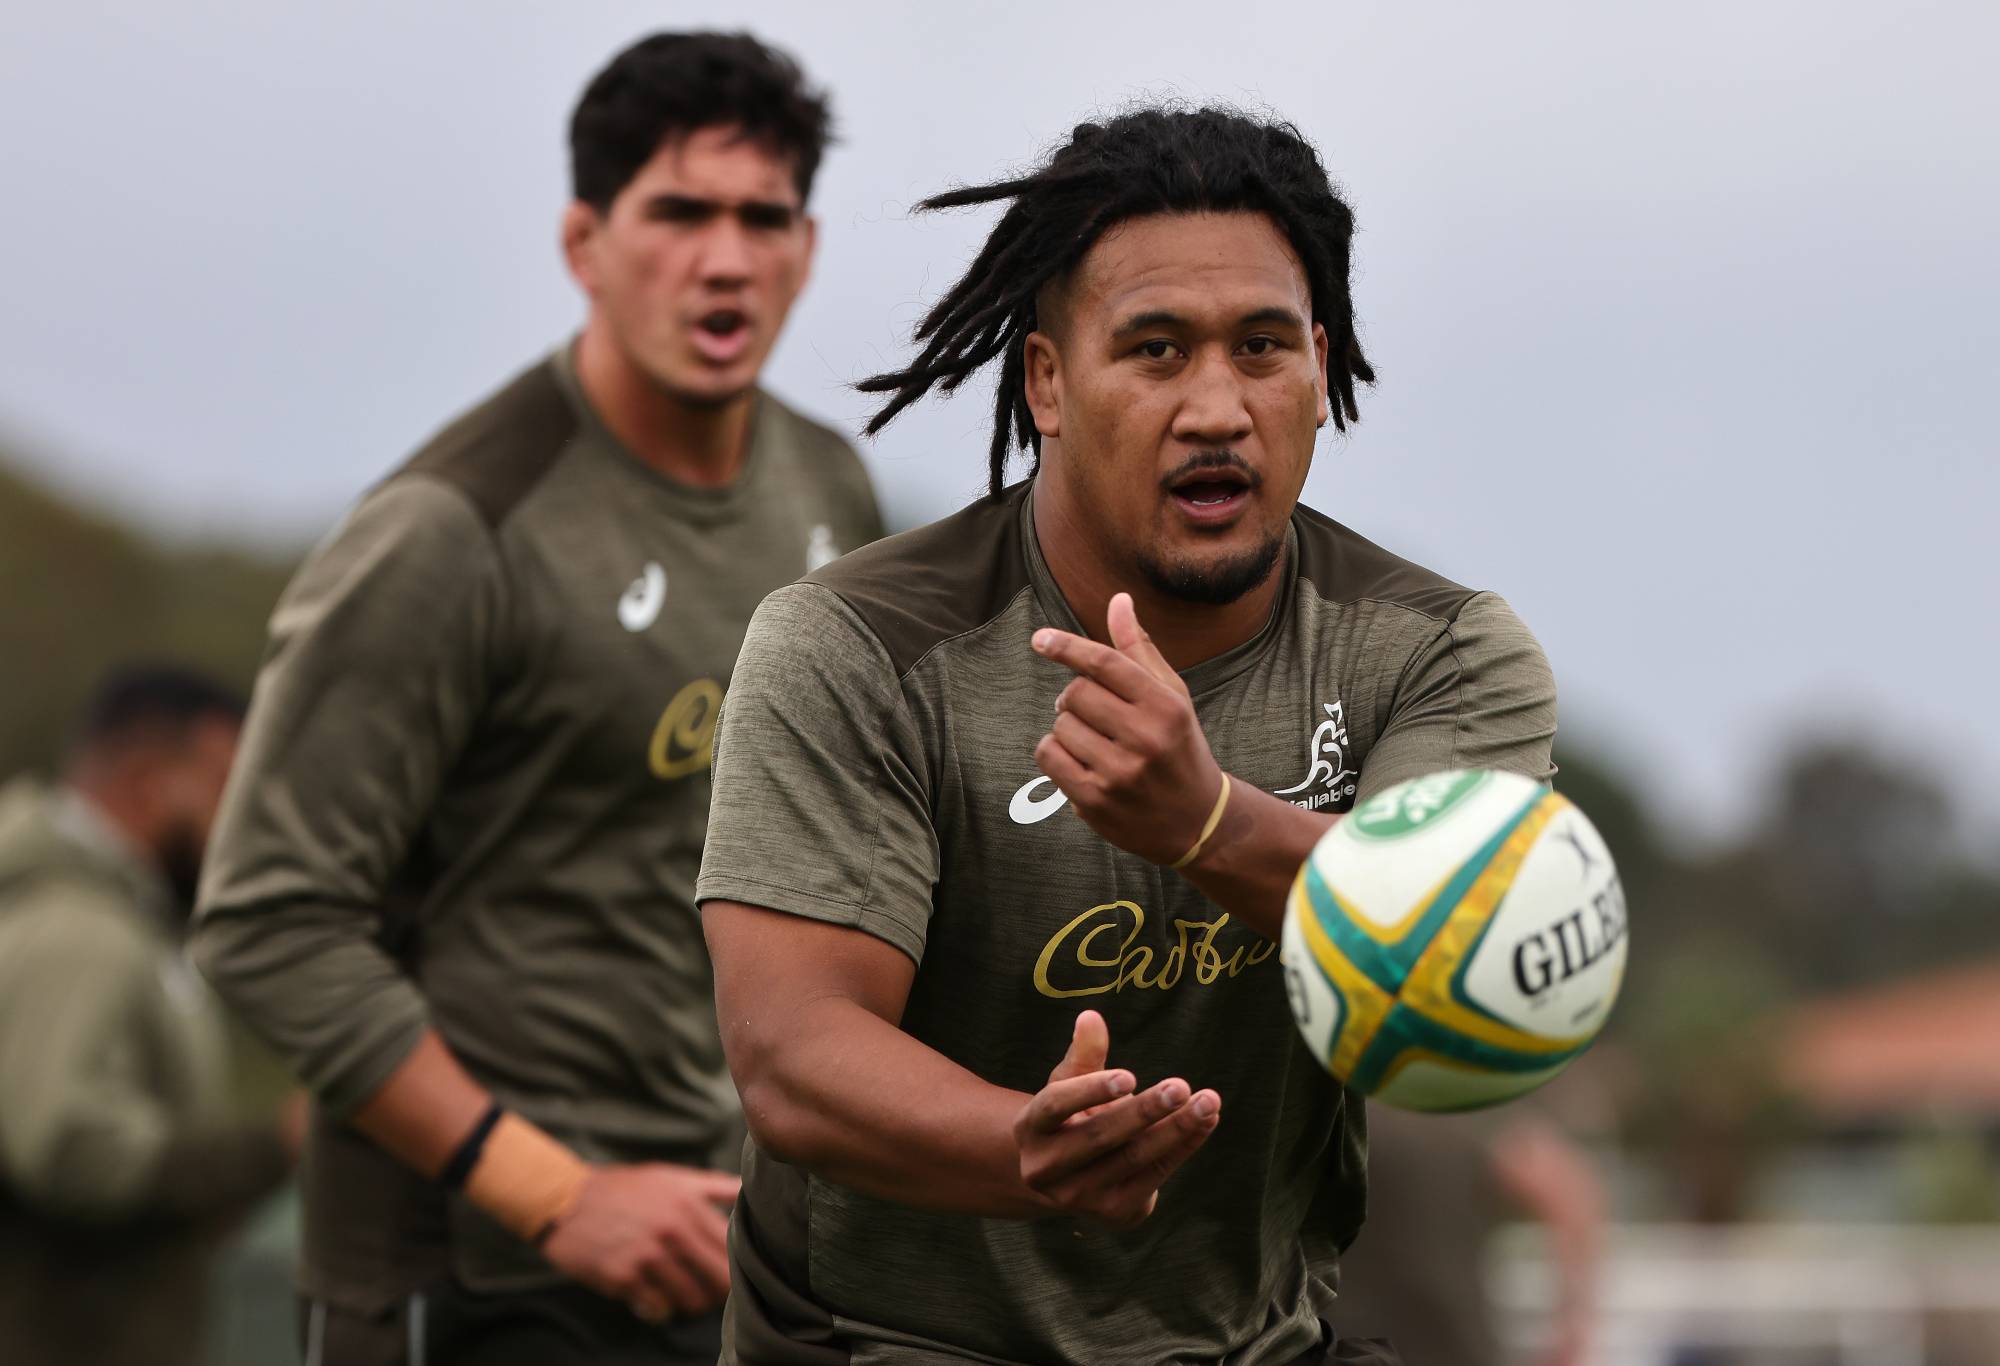 Brandon Paenga-Amosa in action during an Australian Wallabies training session at Wesley Playing Fields on September 01, 2021 in Perth, Australia. (Photo by Paul Kane/Getty Images)